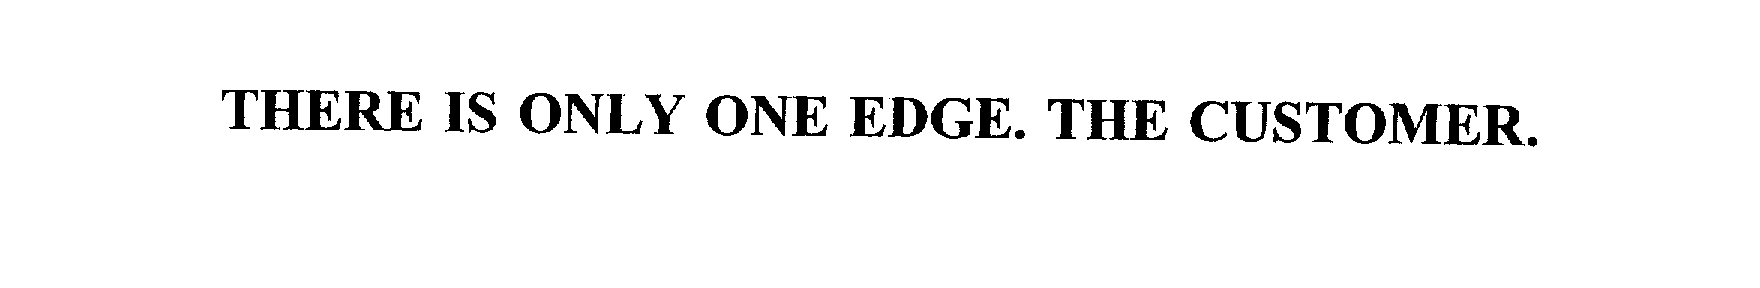  THERE IS ONLY ONE EDGE. THE CUSTOMER.